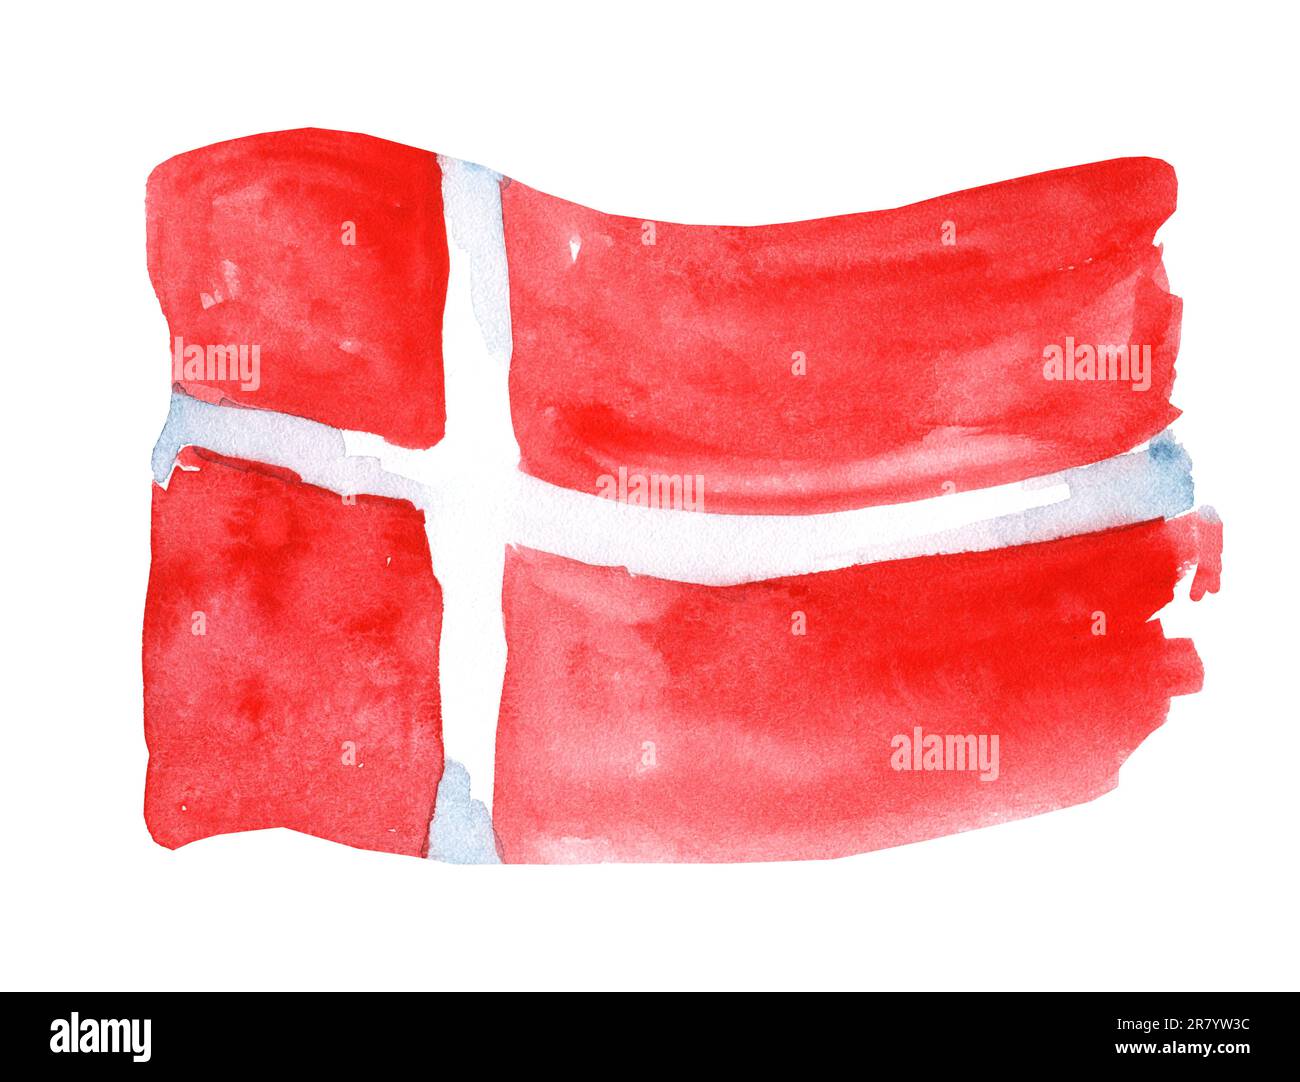 Watercolor illustration. Denmark flag isolated on white background. Red, white, red flag. State symbol Stock Photo